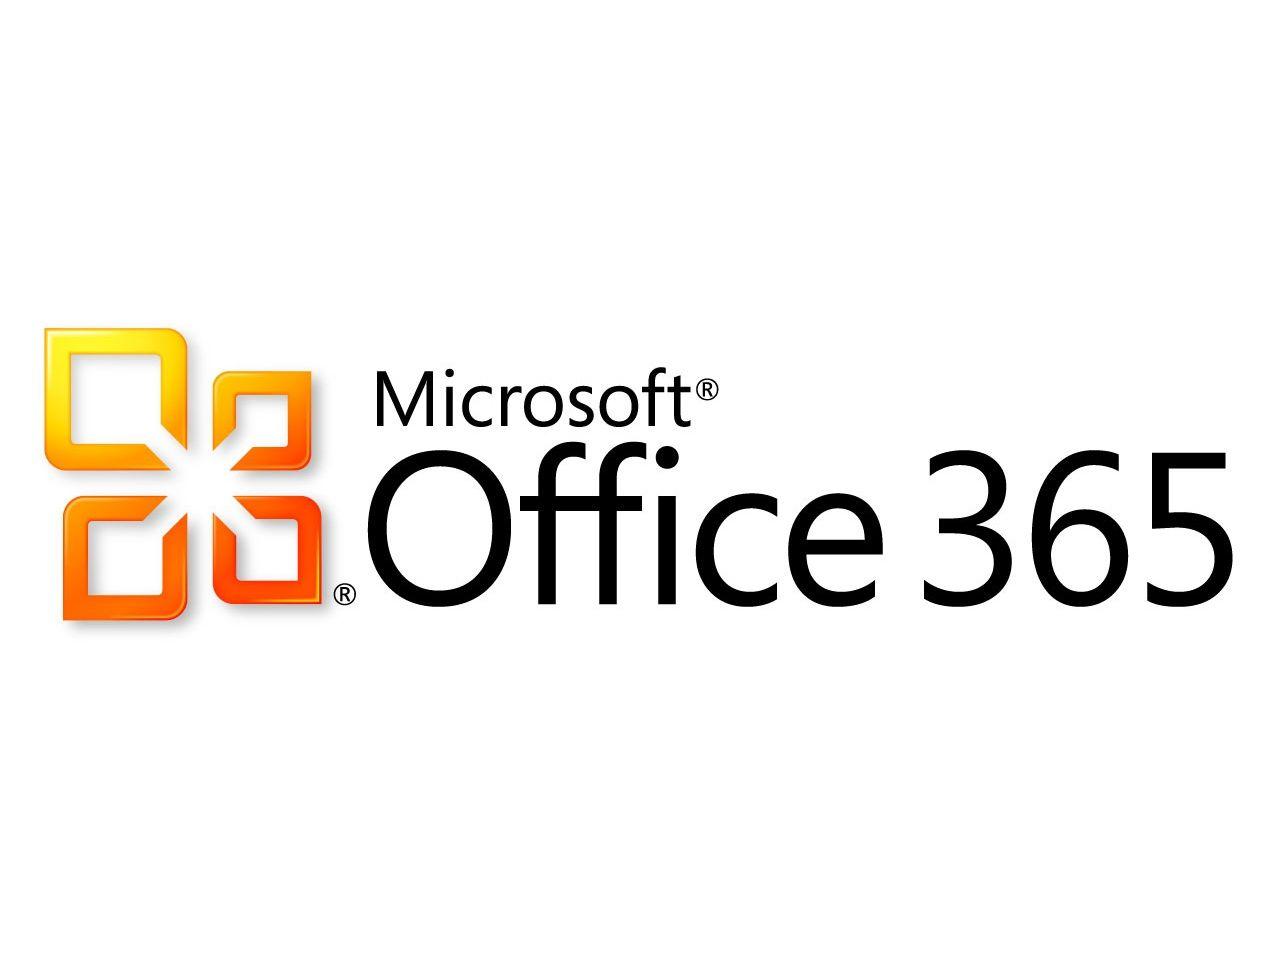 Microsoft Office Logo - Microsoft Office 365 Logo 1280px PNG. Life in the Realm of Fantasy